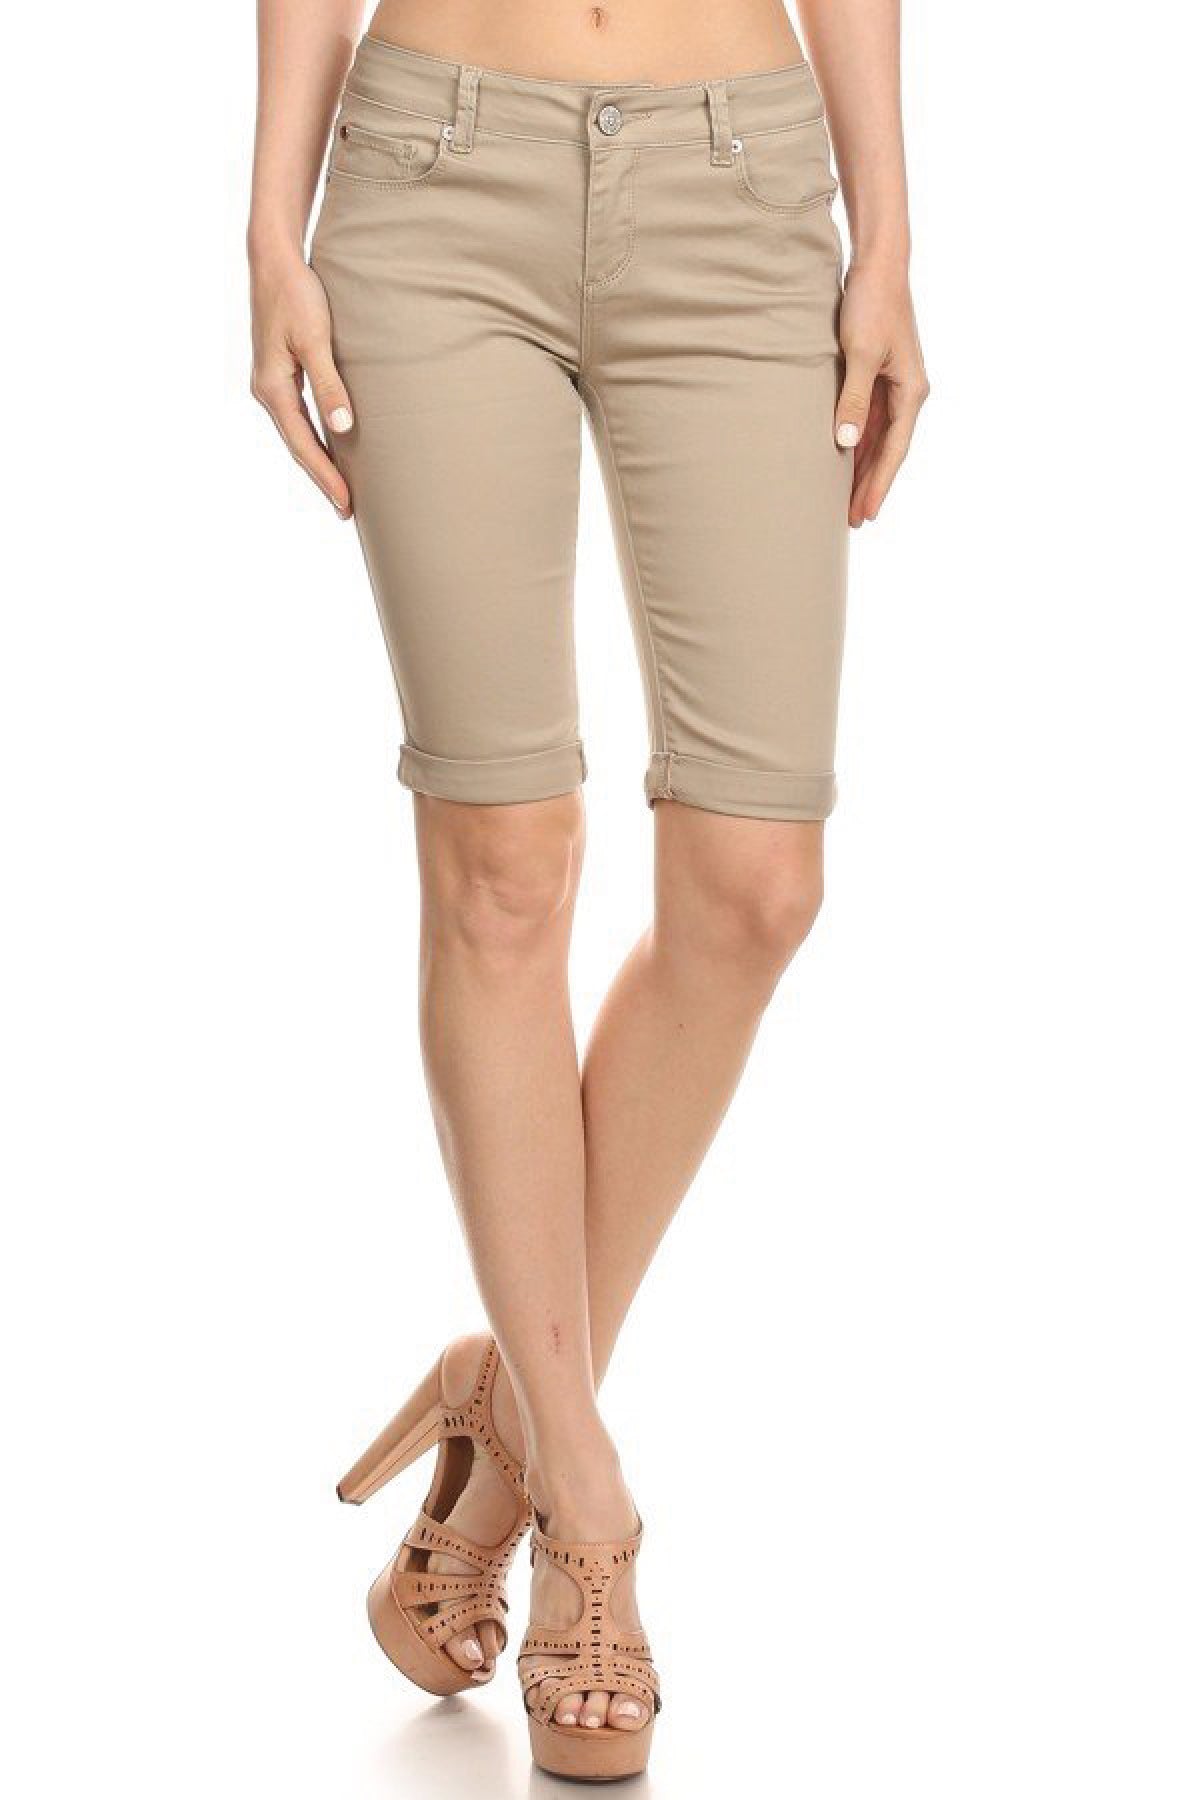 Classic Solid Bermuda Shorts with Rolled Cuffs